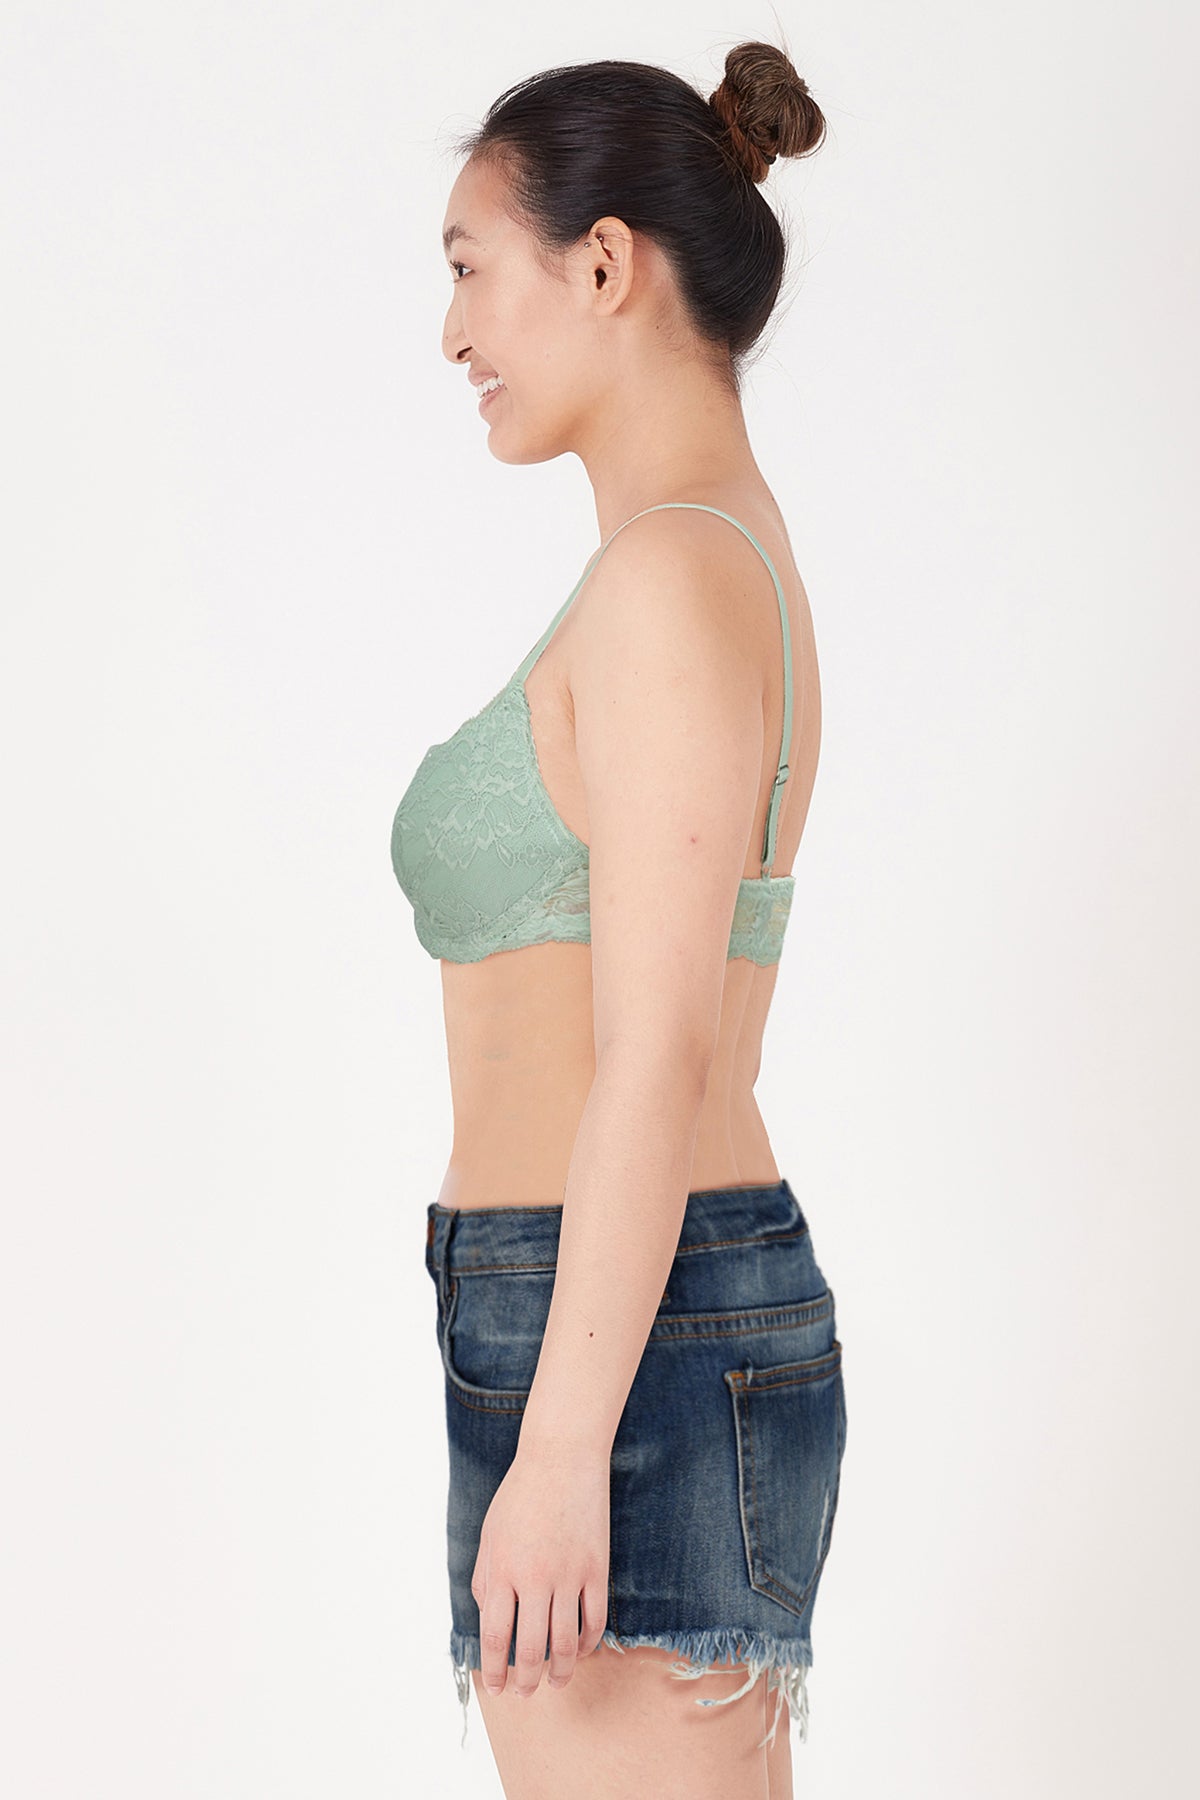 BLS - Defne Wired And Pushup Lace Bra - Sea Green – Makeup City Pakistan